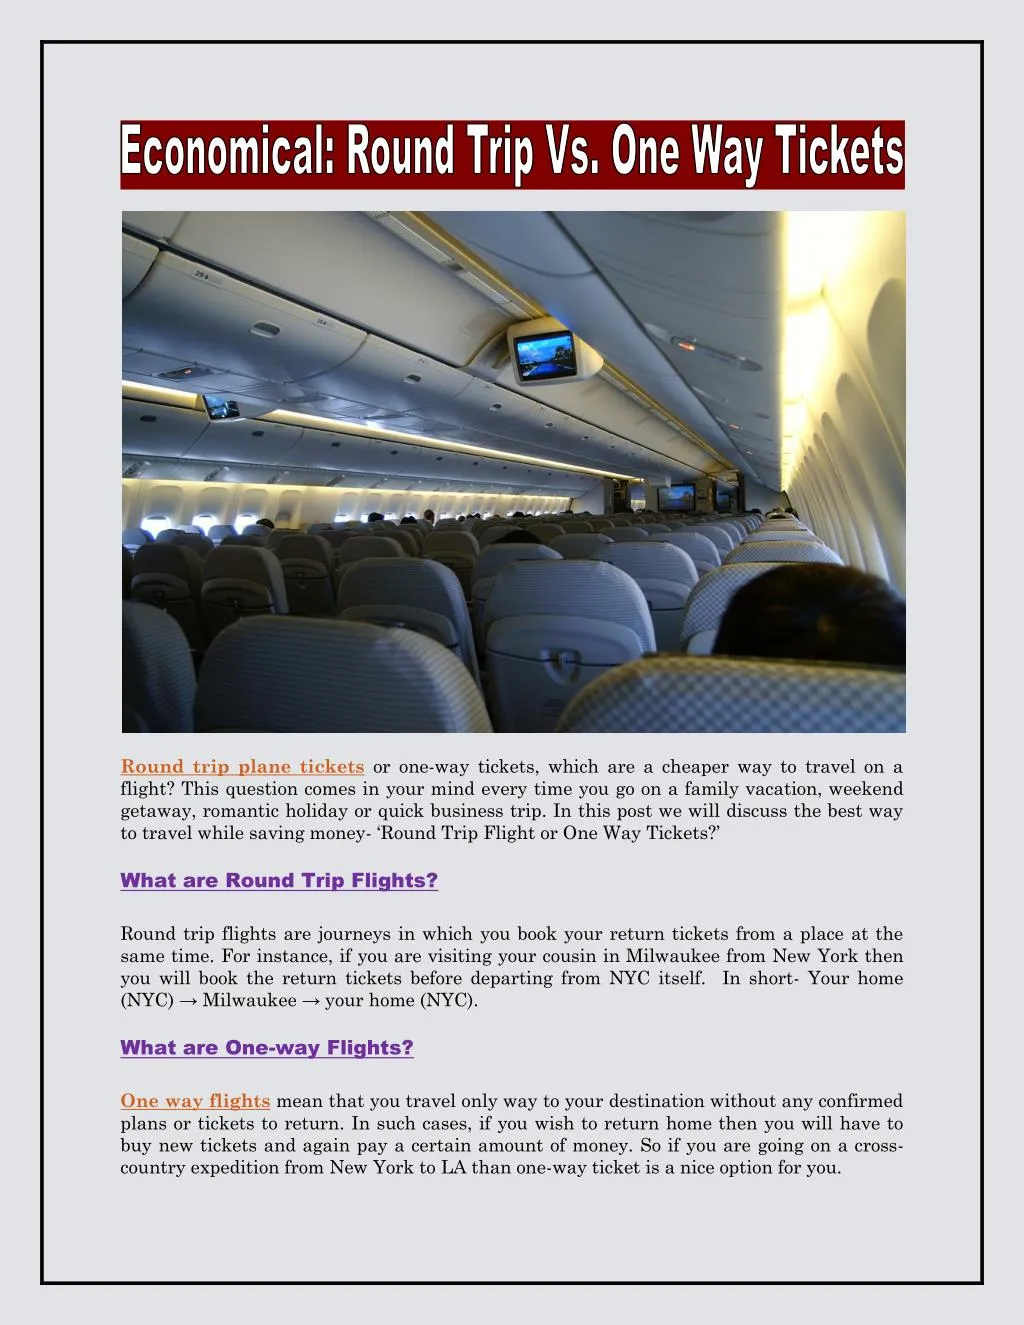 PPT - Big difference between round trip and one way flight tickets booking  PowerPoint Presentation - ID:7553368